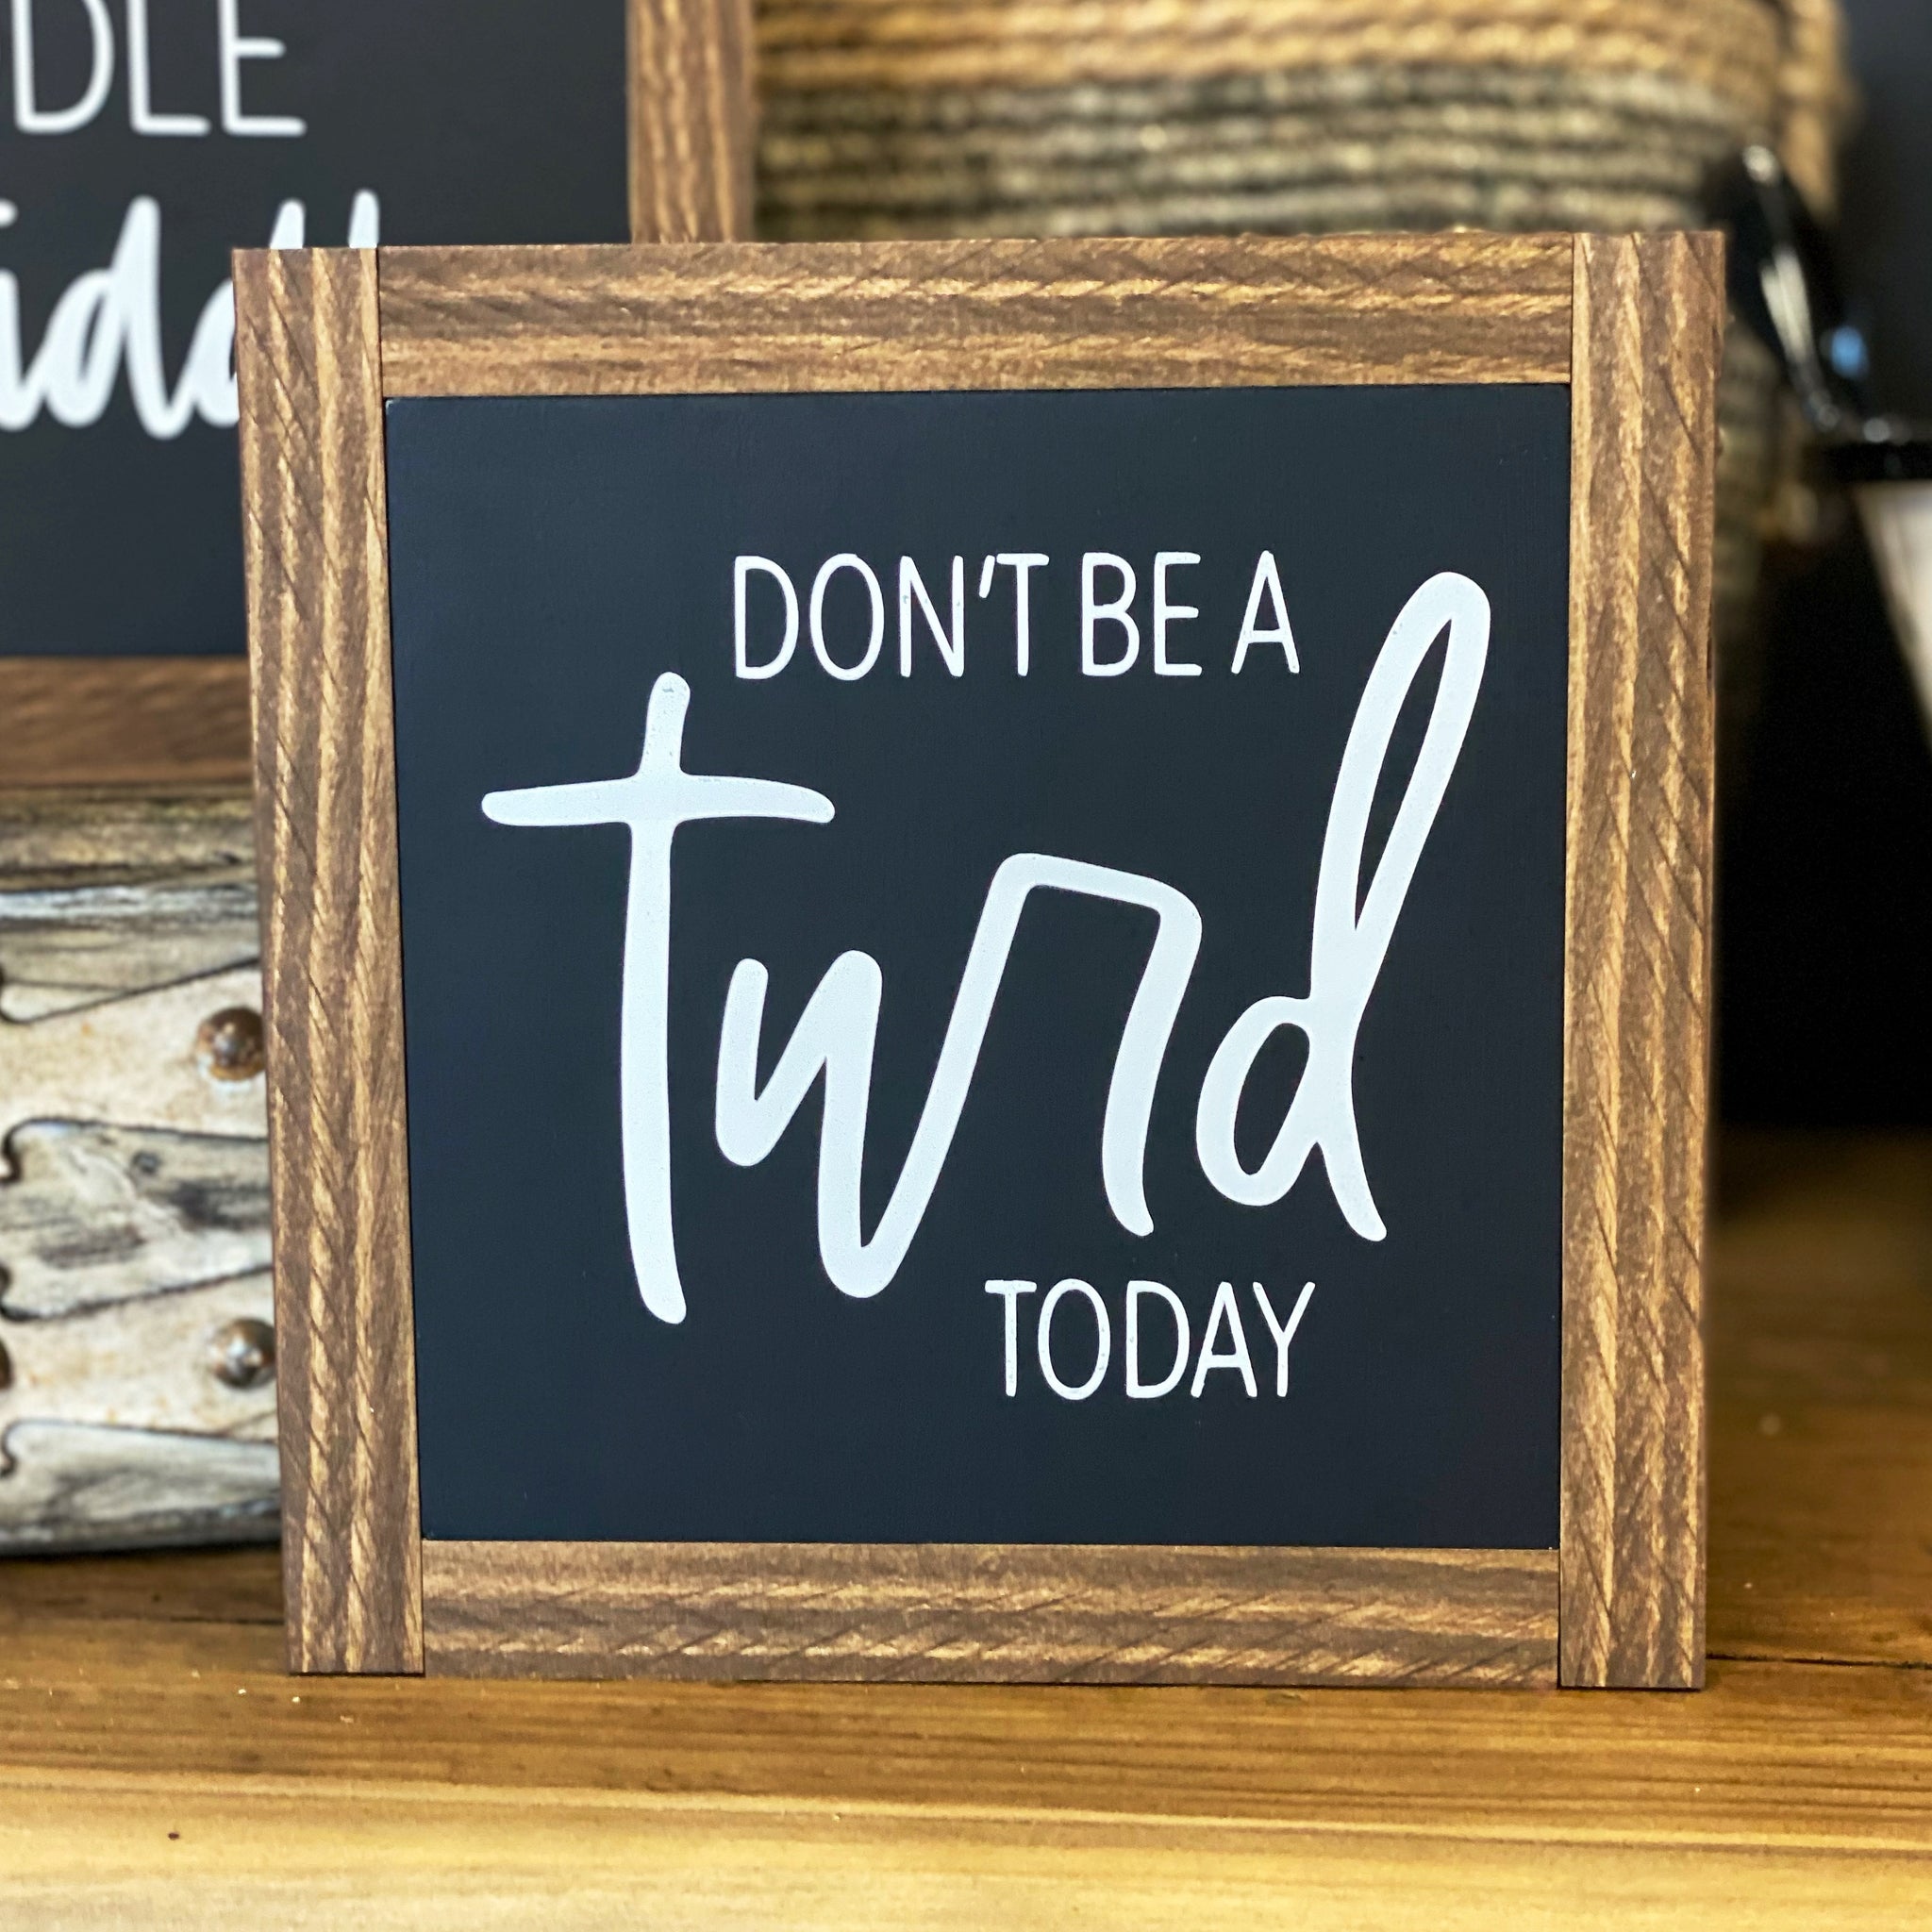 DON'T BE A TURD TODAY